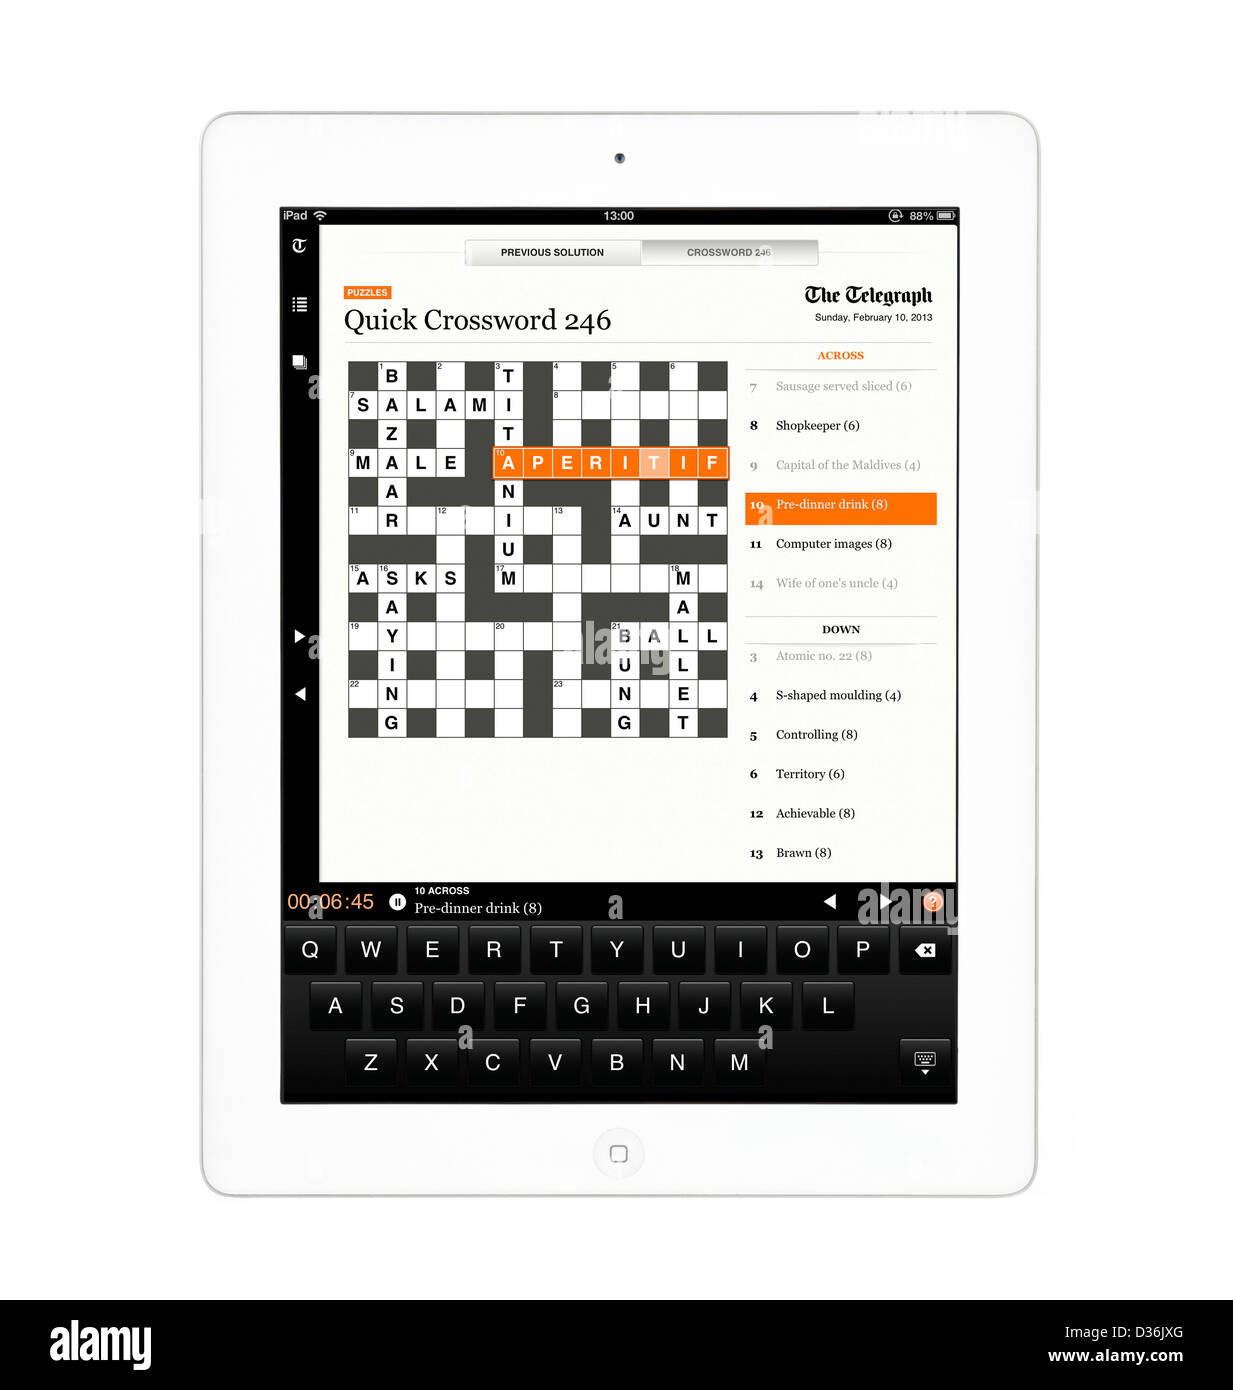 Doing the crossword on the Telegraph app on an Apple iPad 4th genration retina display tablet computer Stock Photo